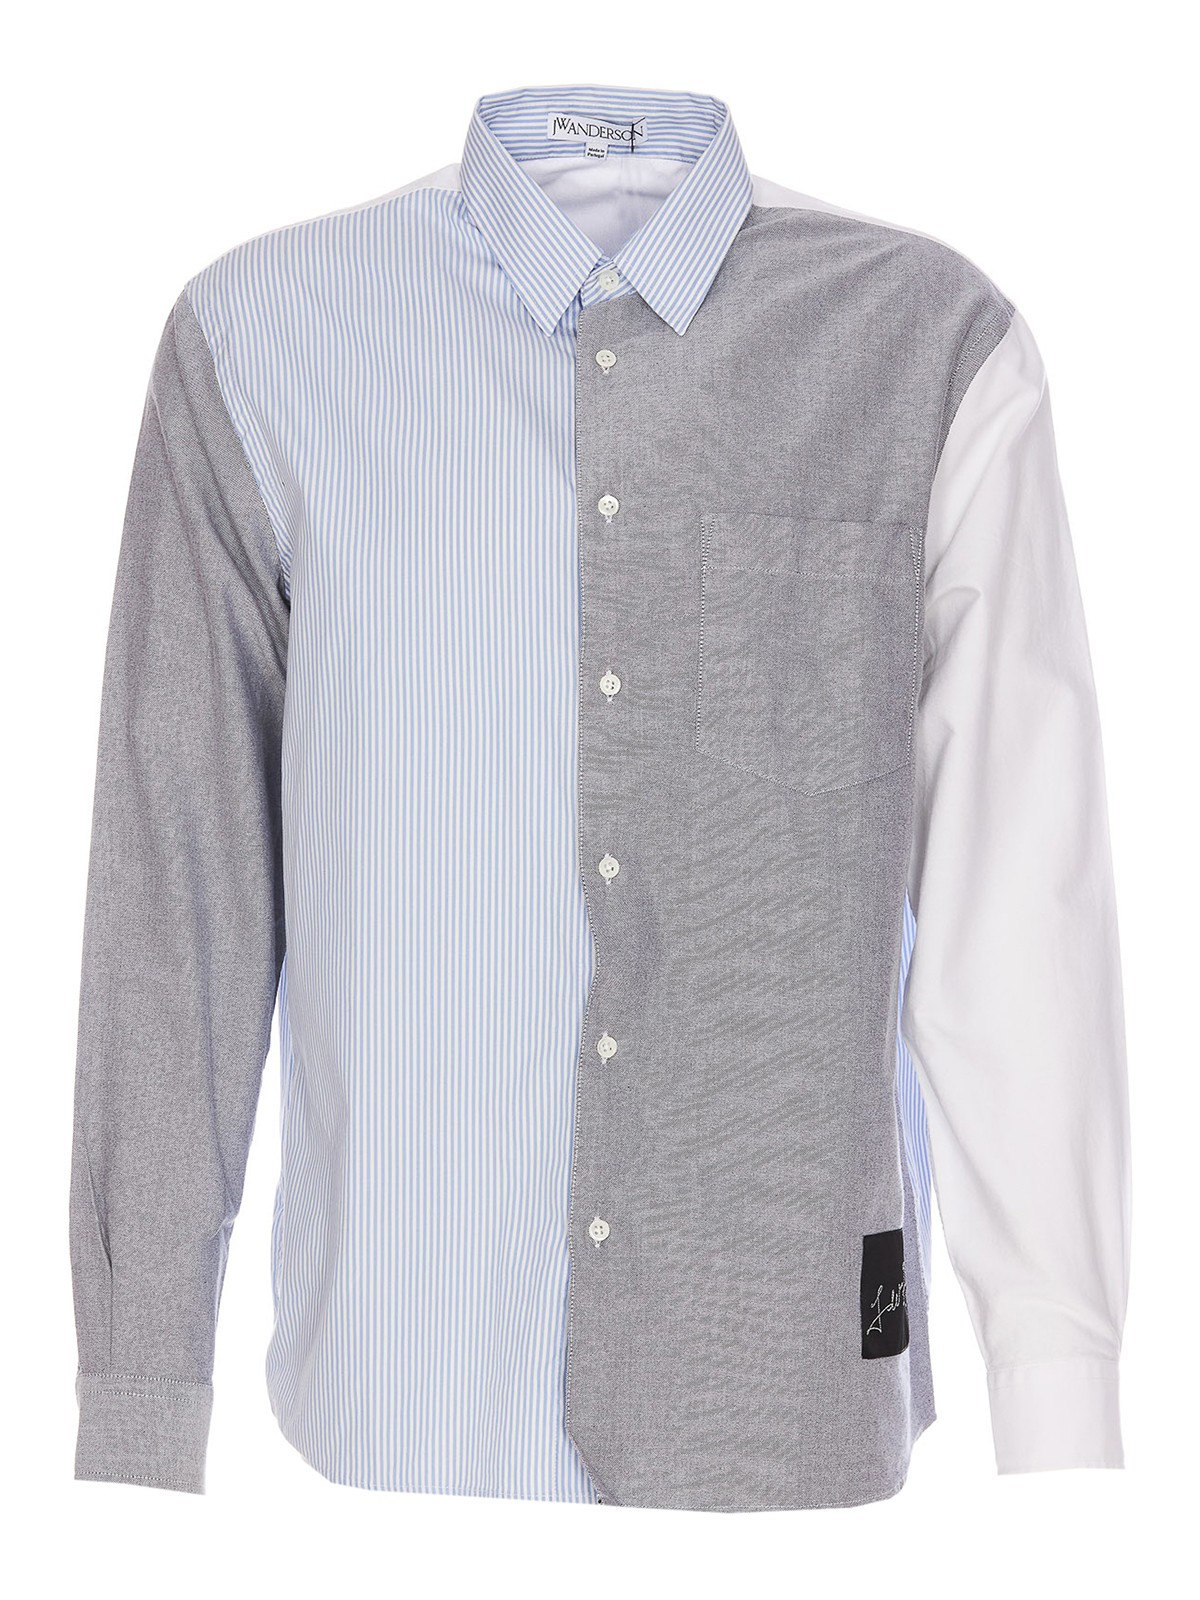 Shirts J.W. Anderson - patchwork shirt - SH0252PG1140868 | thebs.com